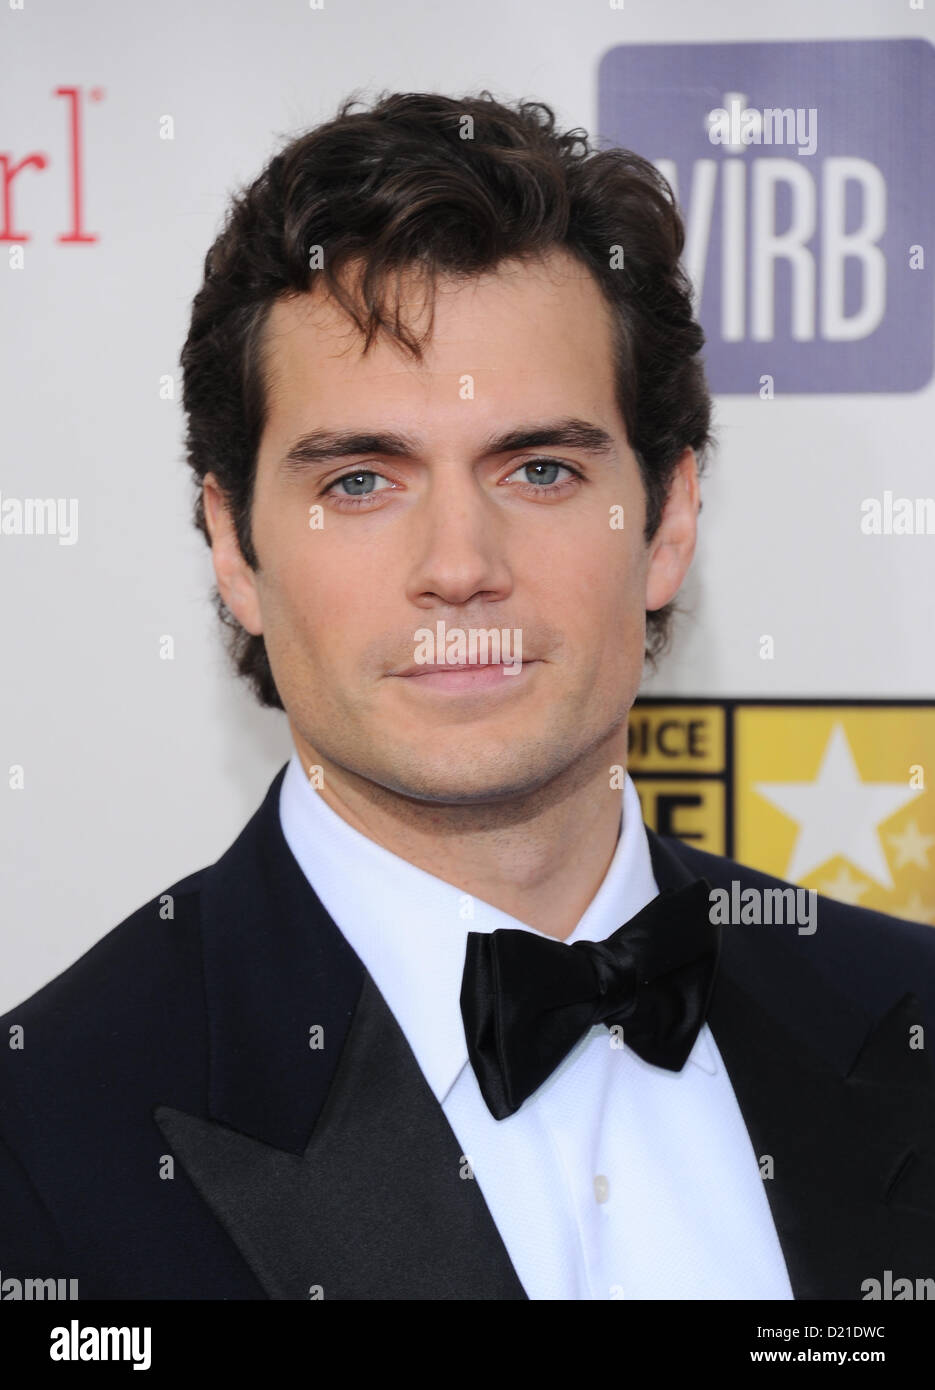 actor-henry-cavill-arrives-at-the-18th-annual-critics-choice-film-D21DWC.jpg